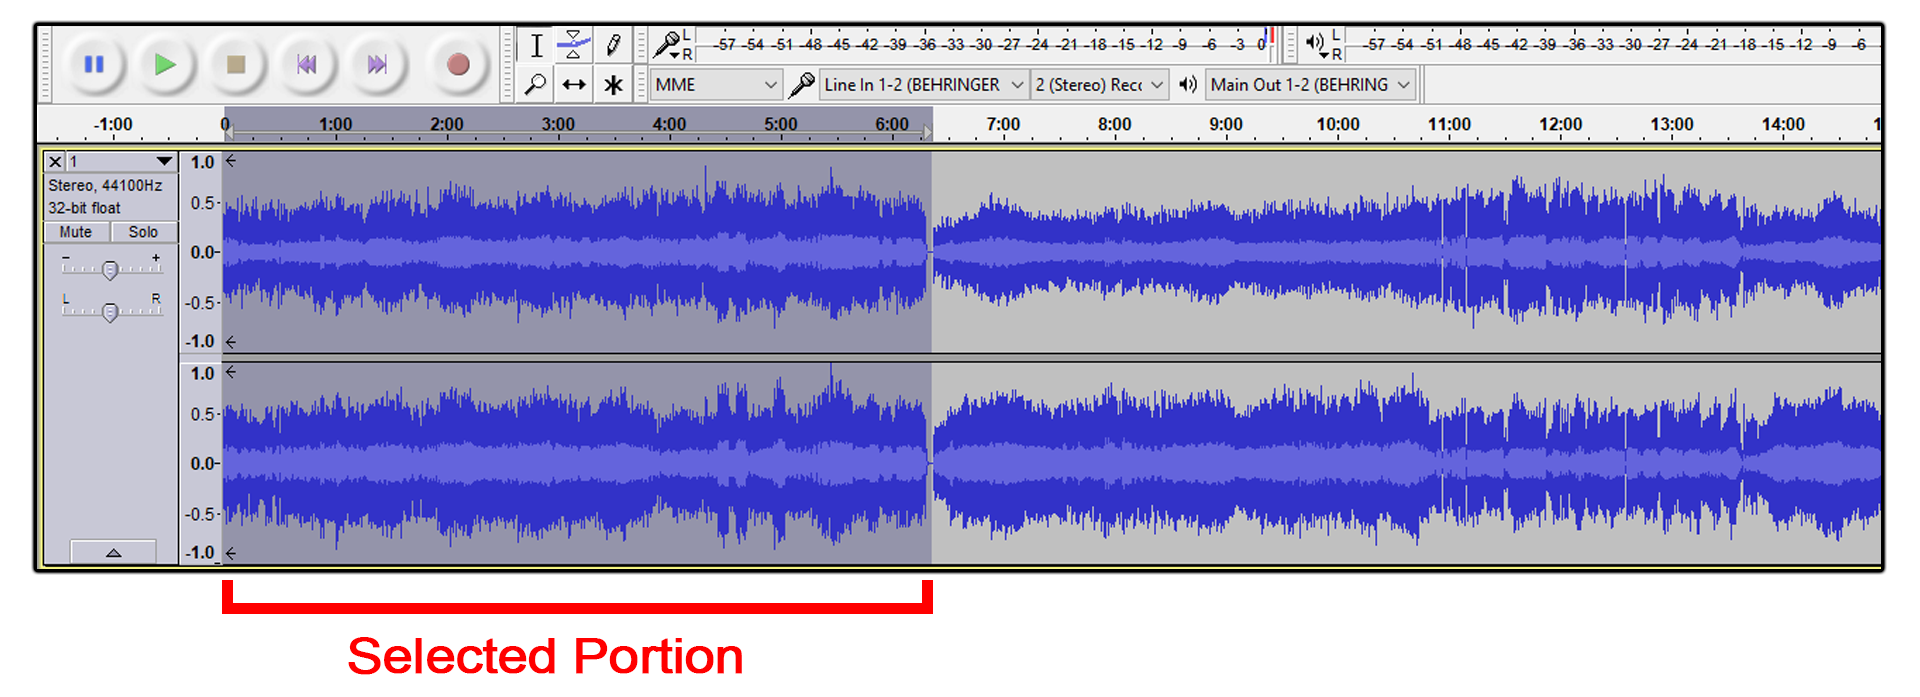 A selected portion of sound (or one song) in Audacity.